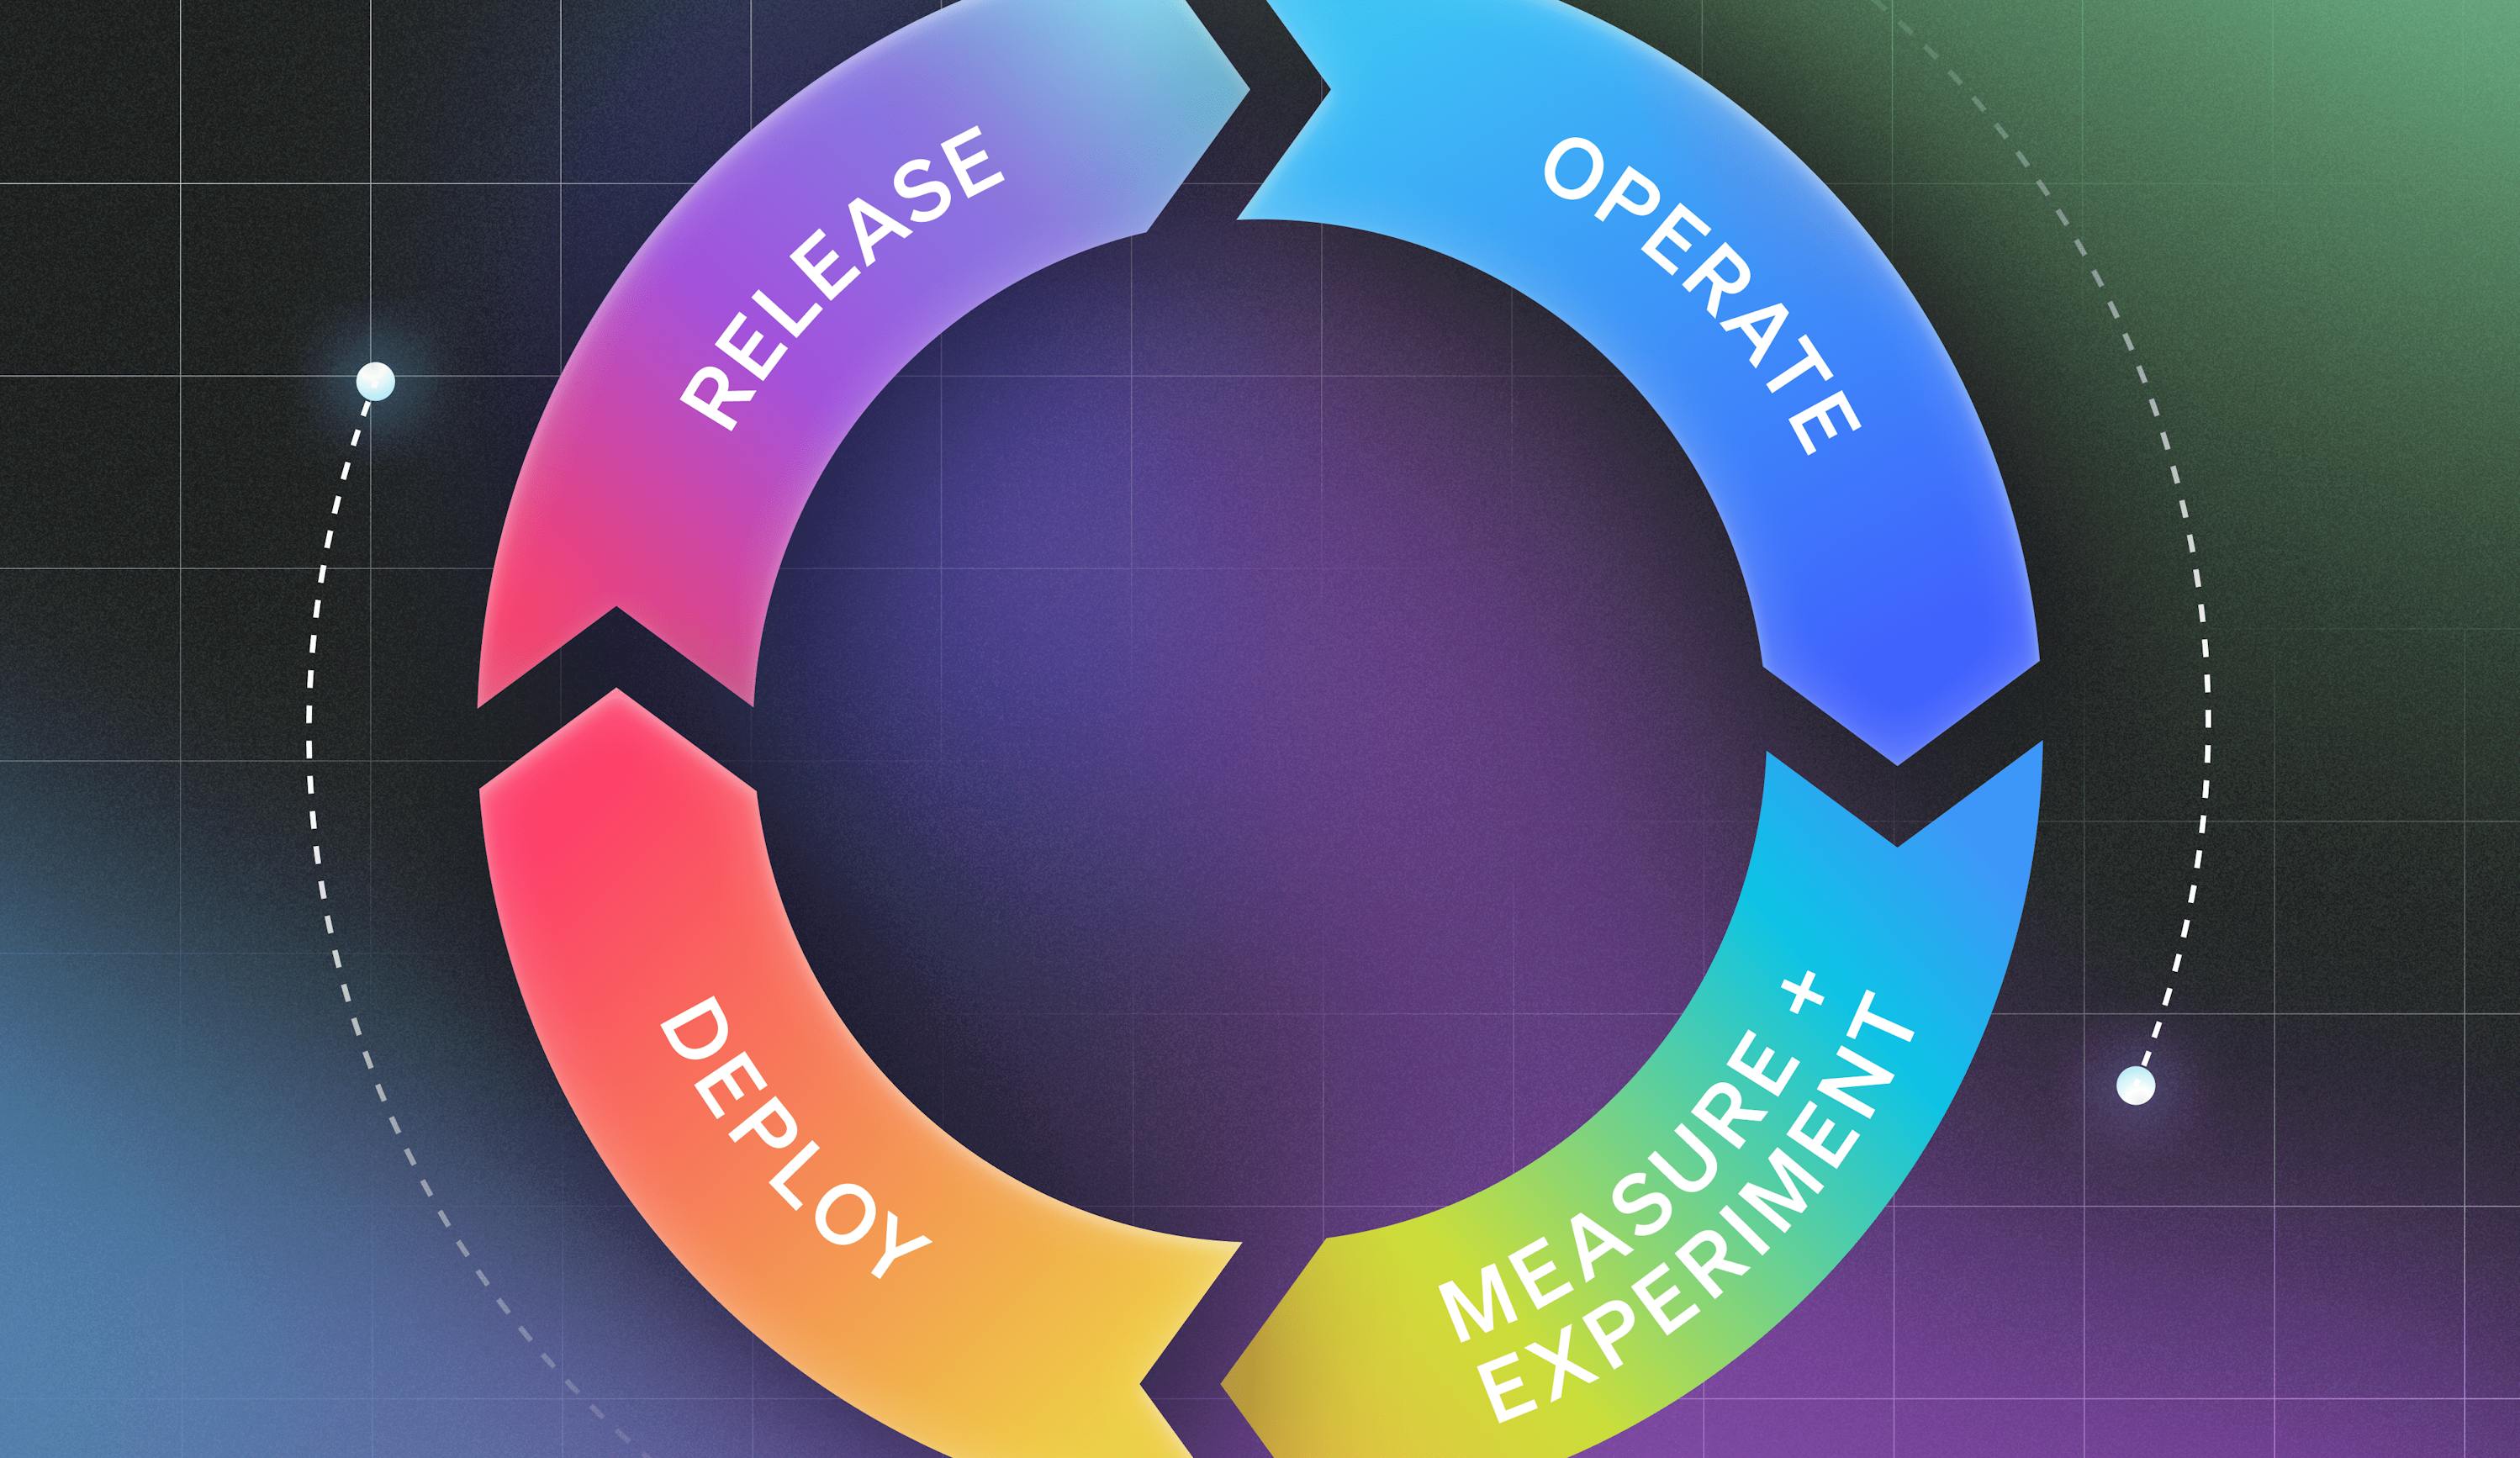 Modern DevOps: The Shift to Operating Continuously featured image